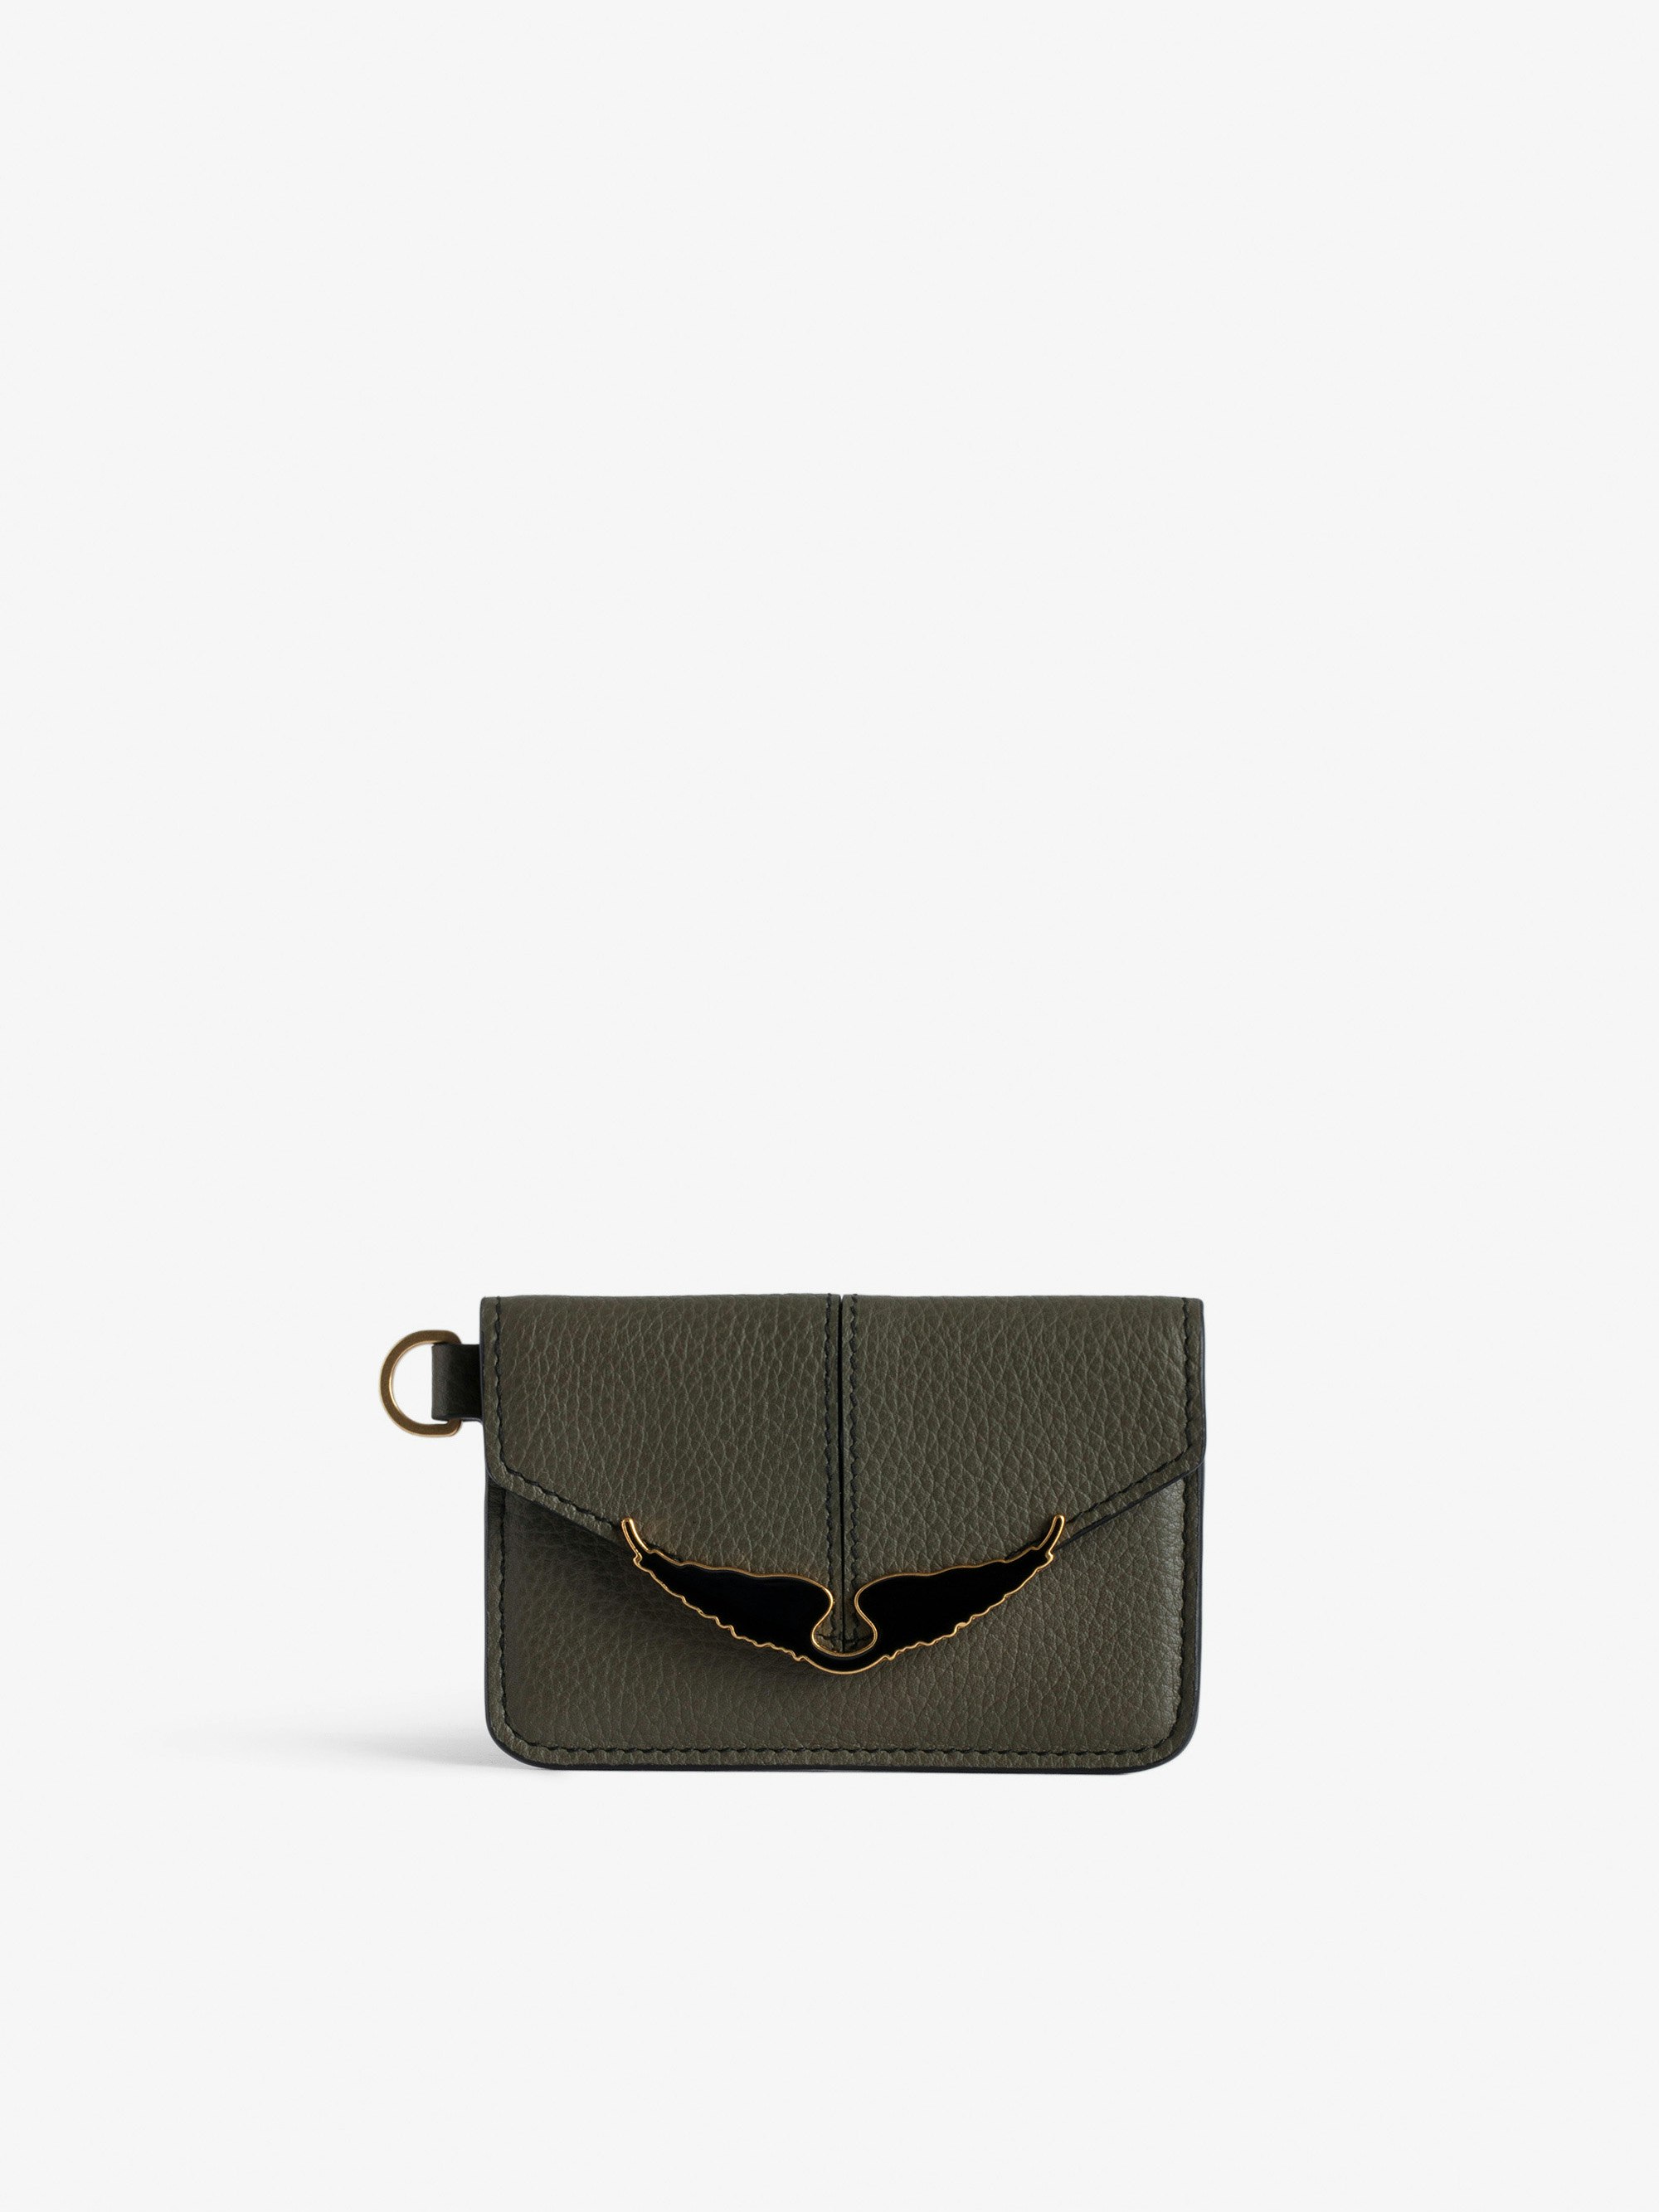 Borderline Pass Card Case - Women’s khaki grained patent leather envelope card holder with wings charm.